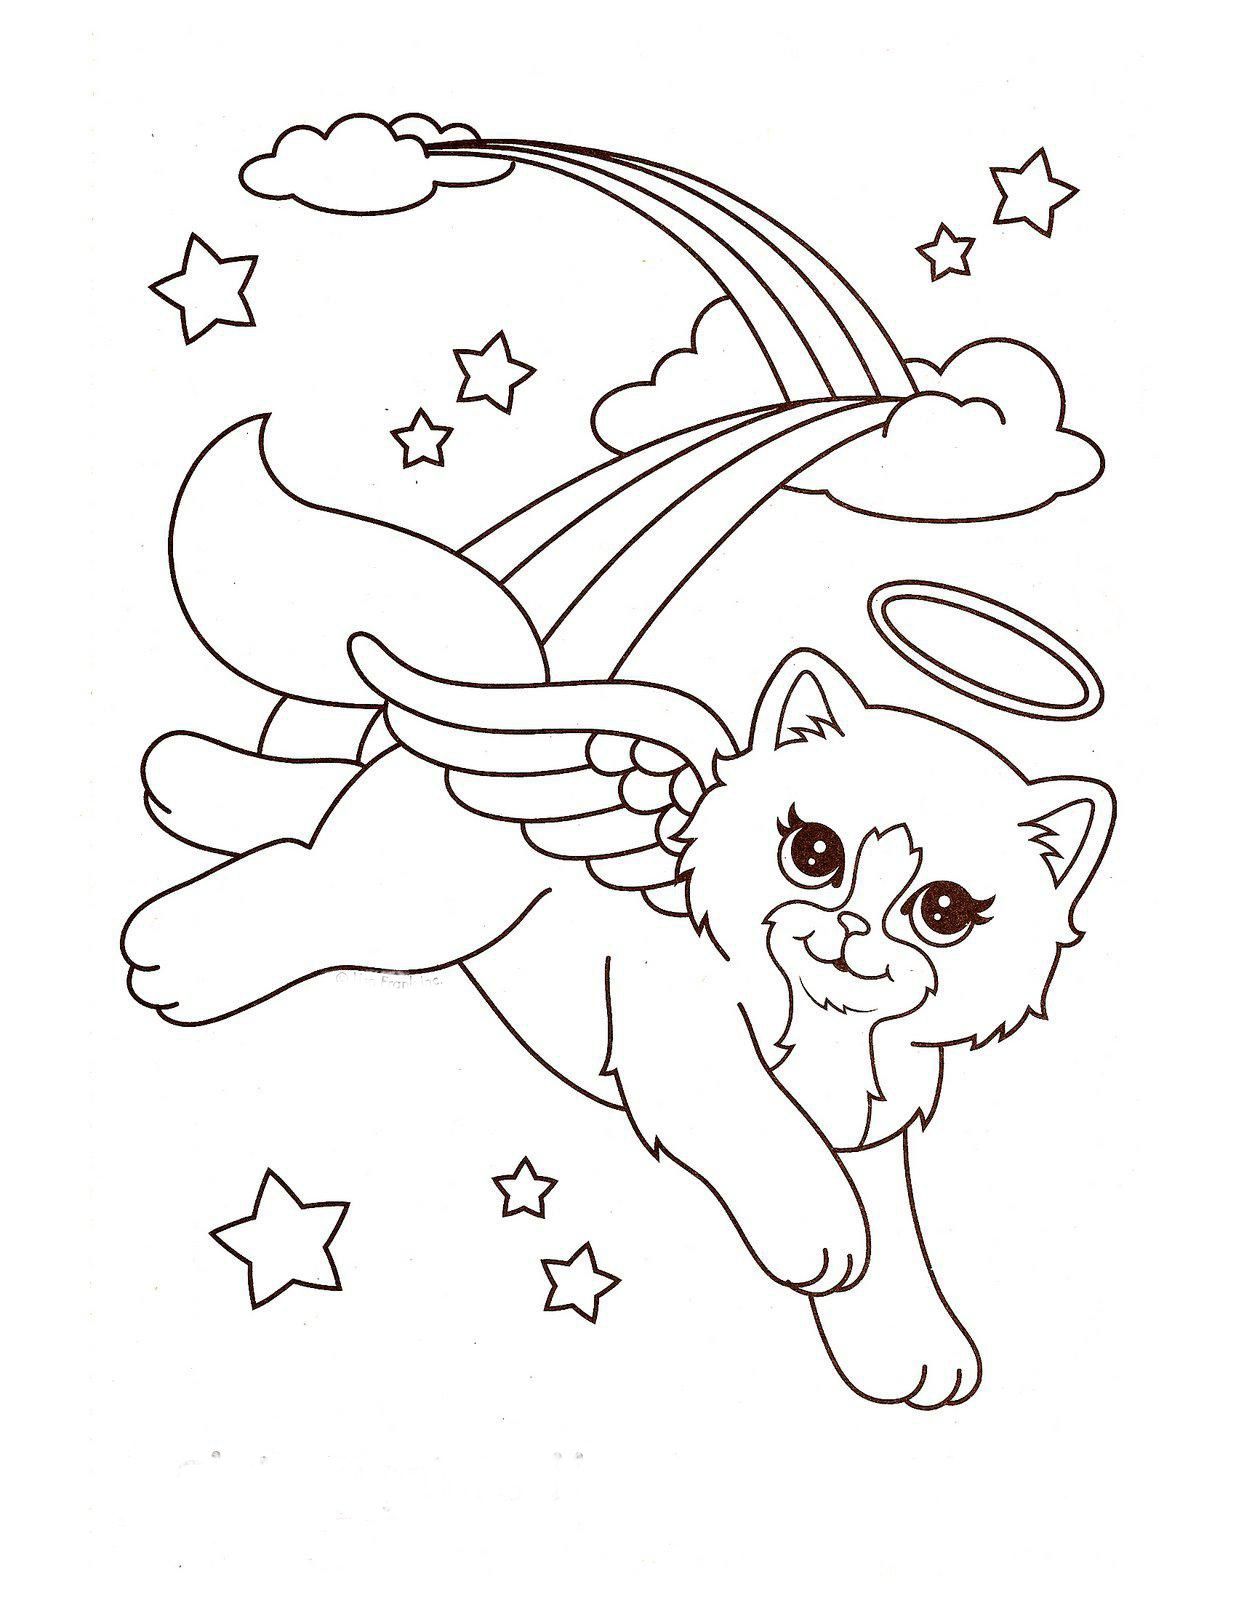 Printable Lisa Frank Coloring Pages Free - Coloring Home